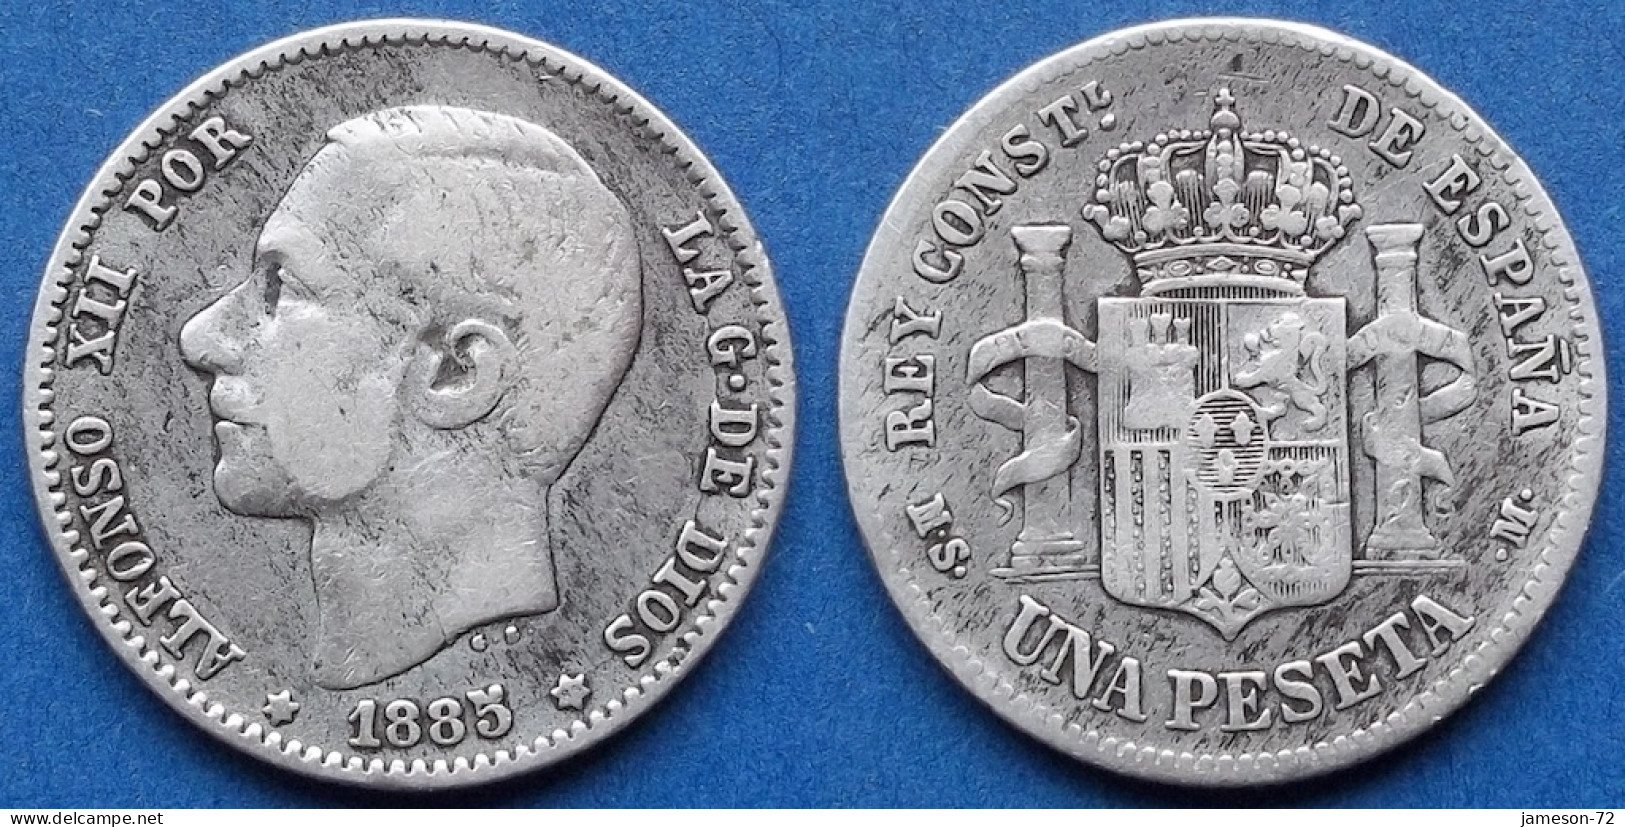 SPAIN - Silver 1 Peseta 1885 *85 MS M KM# 686 Alfonso XII (1874-1885) - Edelweiss Coins - First Minting